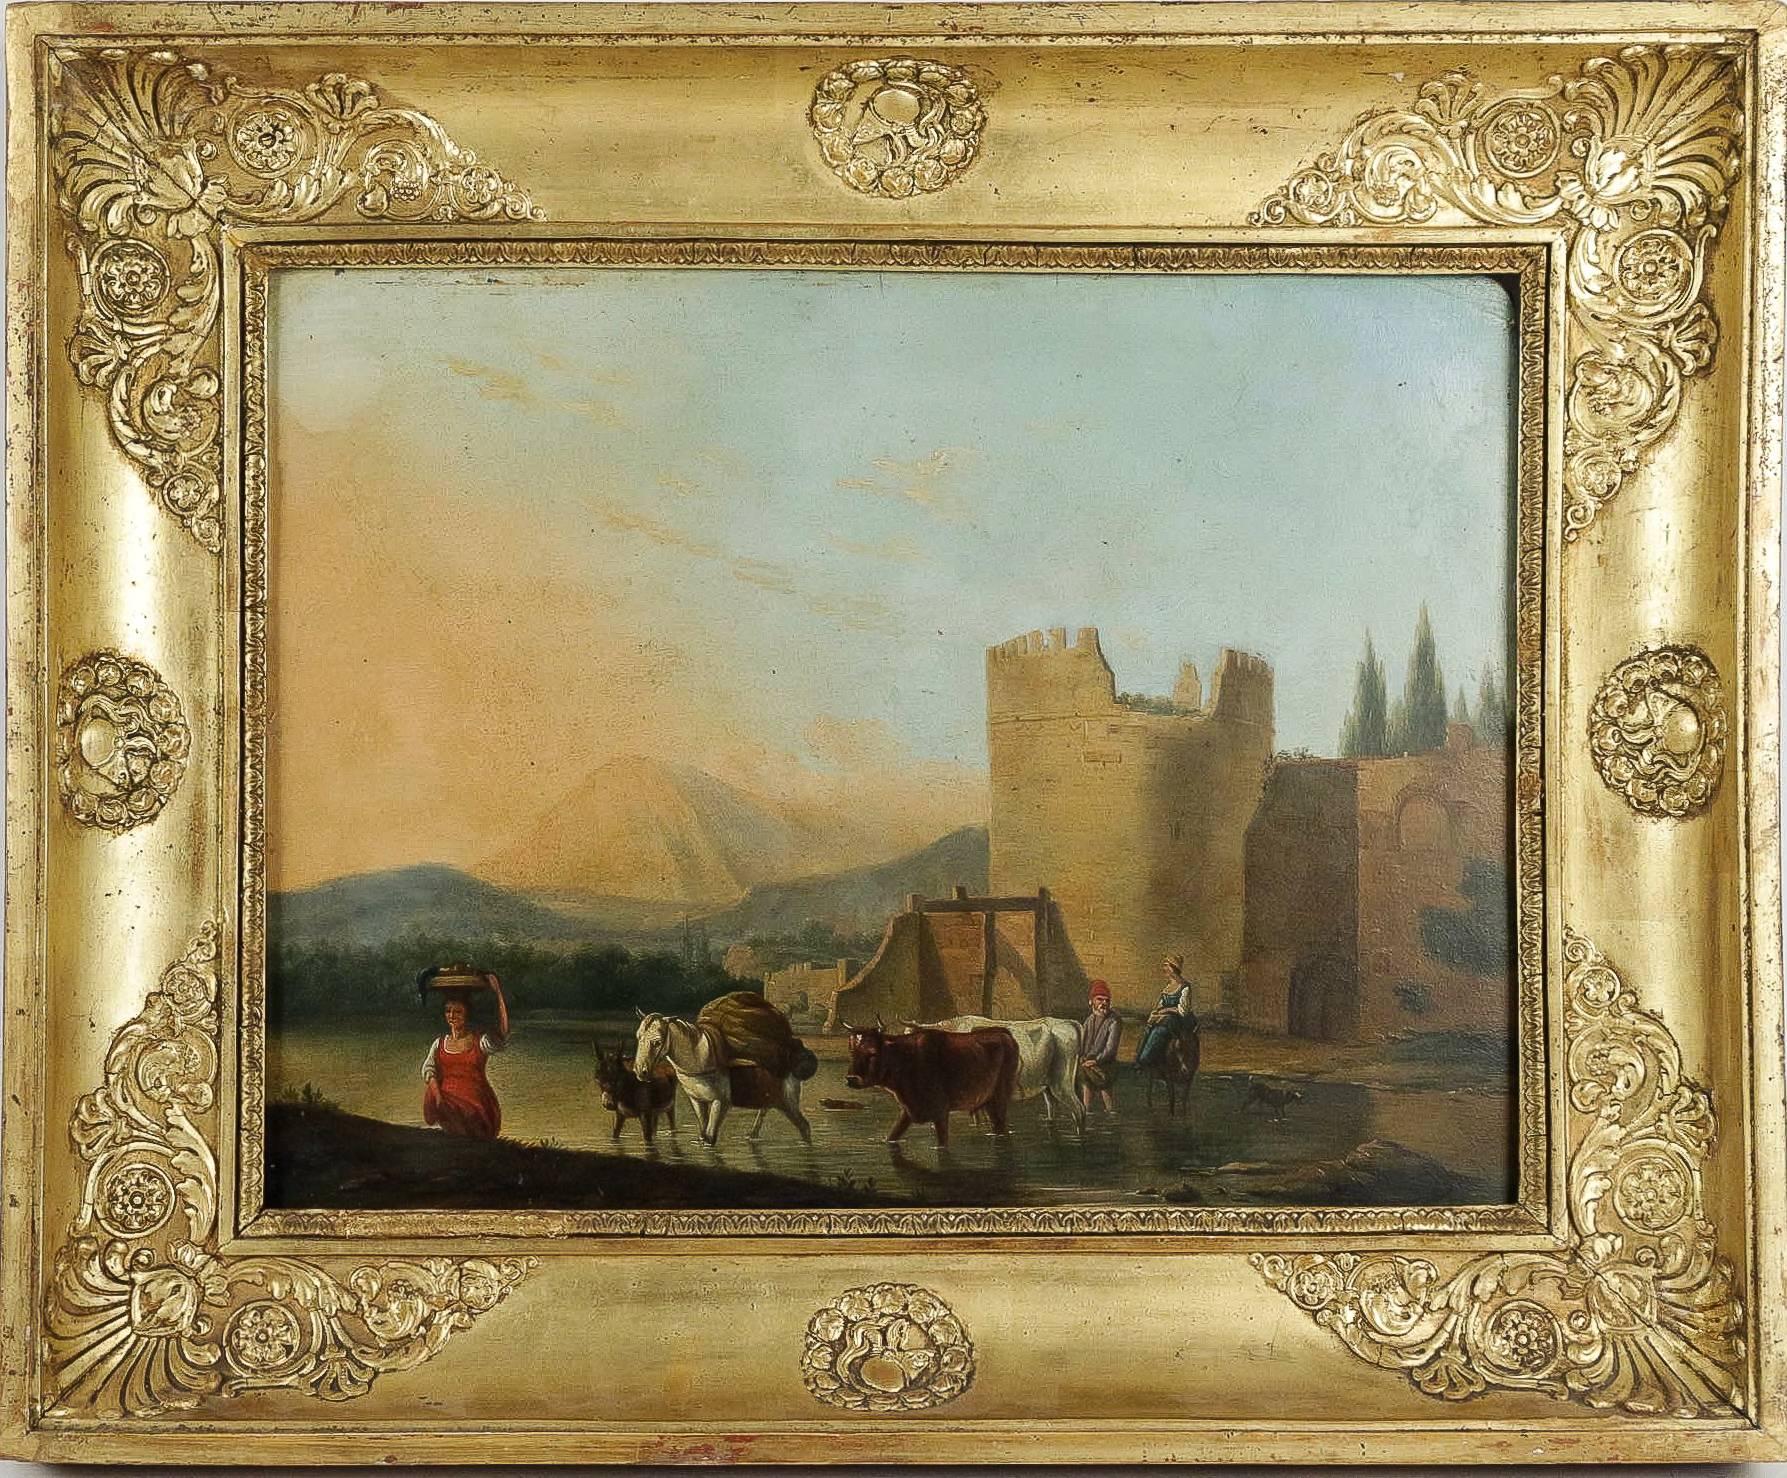 A lovely Romantic Italian painting. Oil on panel depicting “an Italian rural landscape with the shepherd and the shepherdess crossing a river with their herd.”
Impressive set of colors which make this painting warm.

Original giltwood